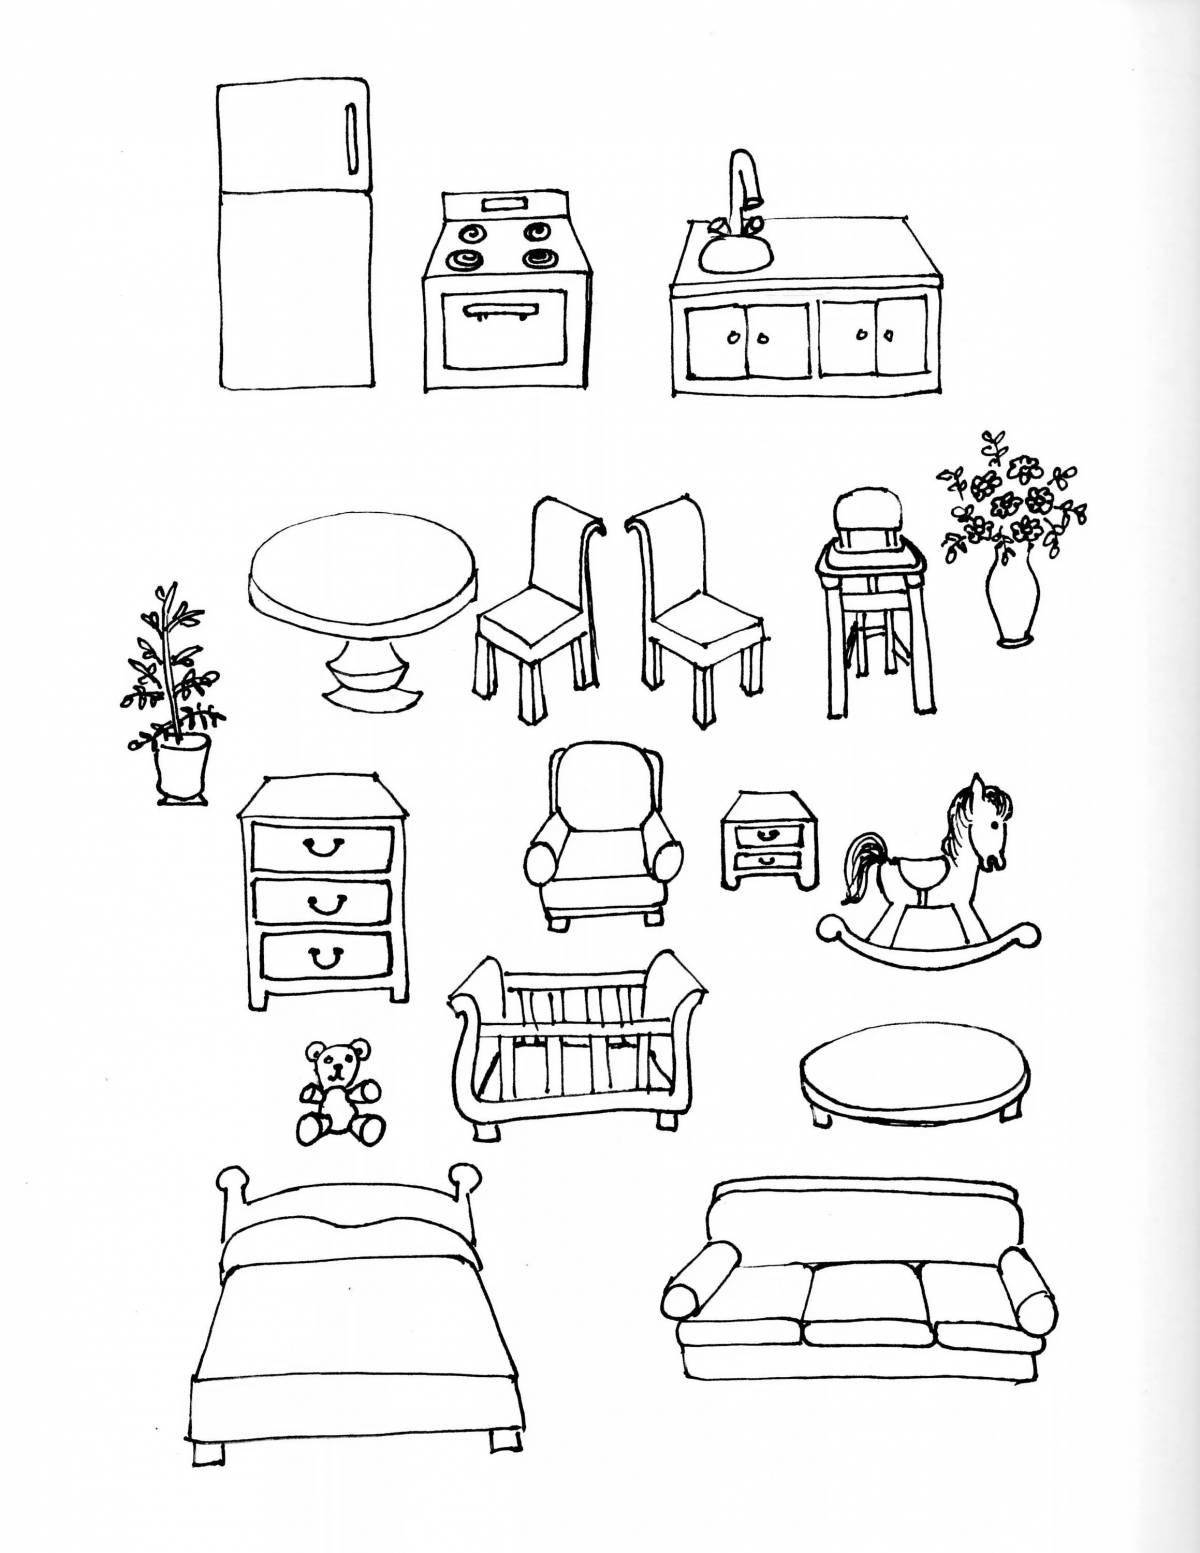 Adorable furniture coloring book for kids